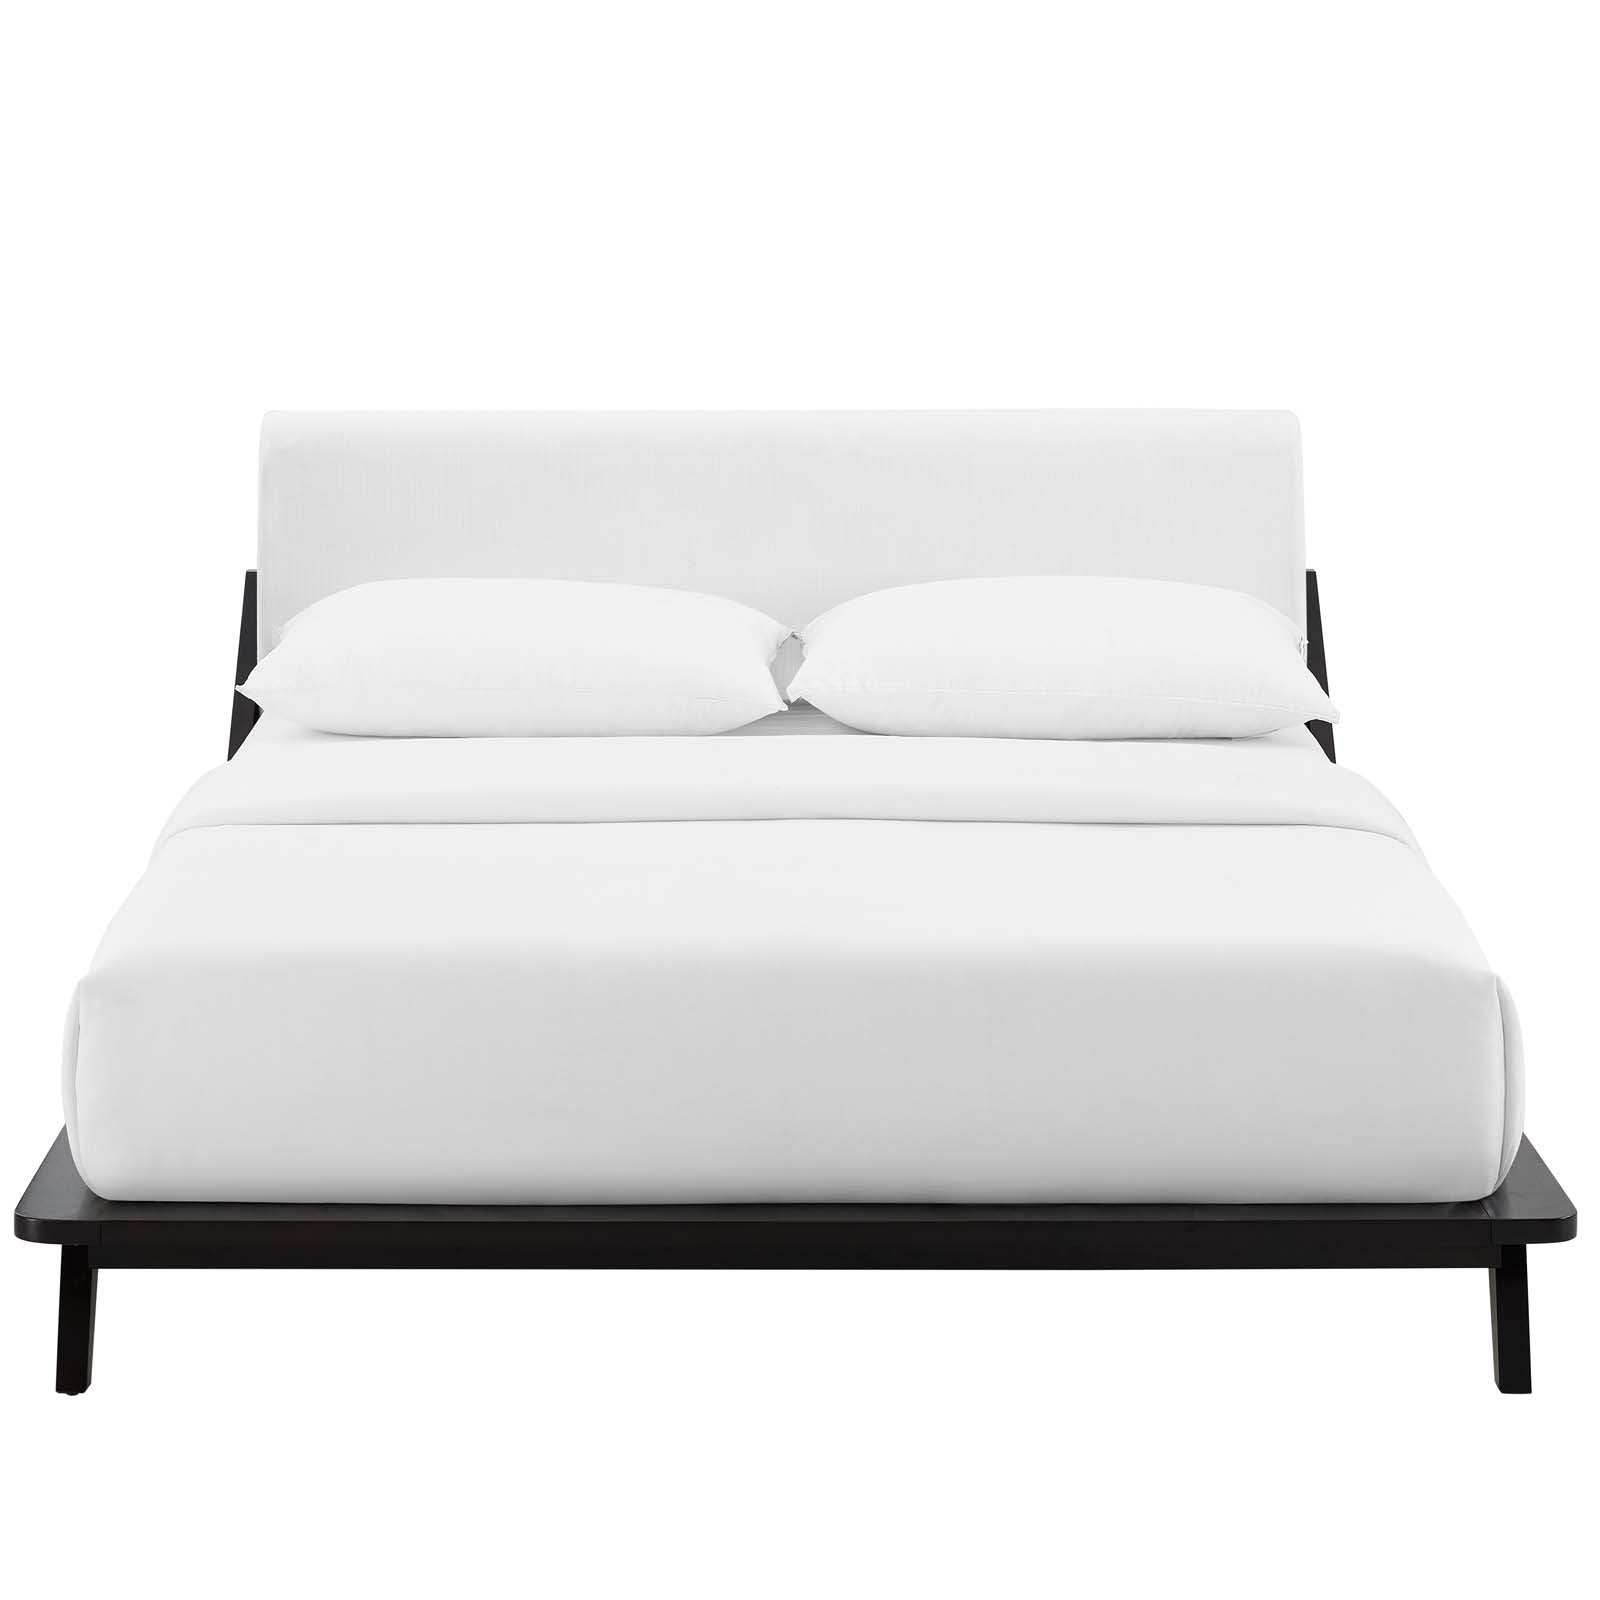 Modway Beds - Luella Queen Upholstered Fabric Platform Bed Cappuccino White